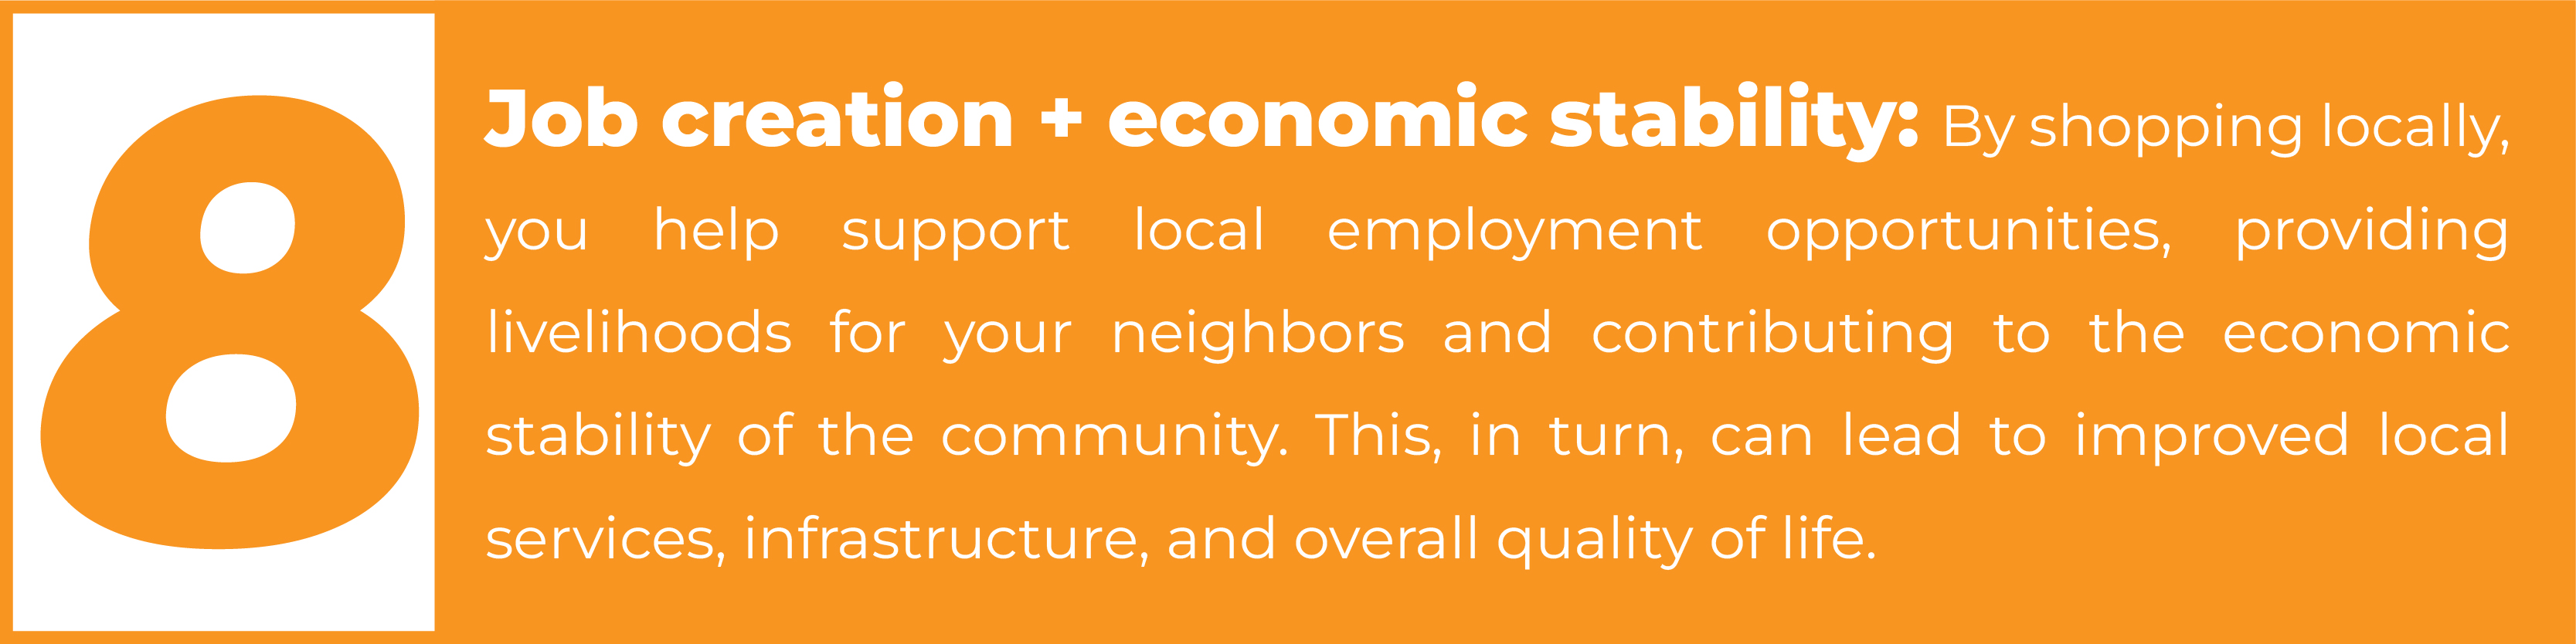 8. Job creation + economic stability: By shopping locally, you help support local employment opportunities, providing livelihoods for your neighbors and contributing to the economic stability of the community. This, in turn, can lead to improved local services, infrastructure, and overall quality of life.